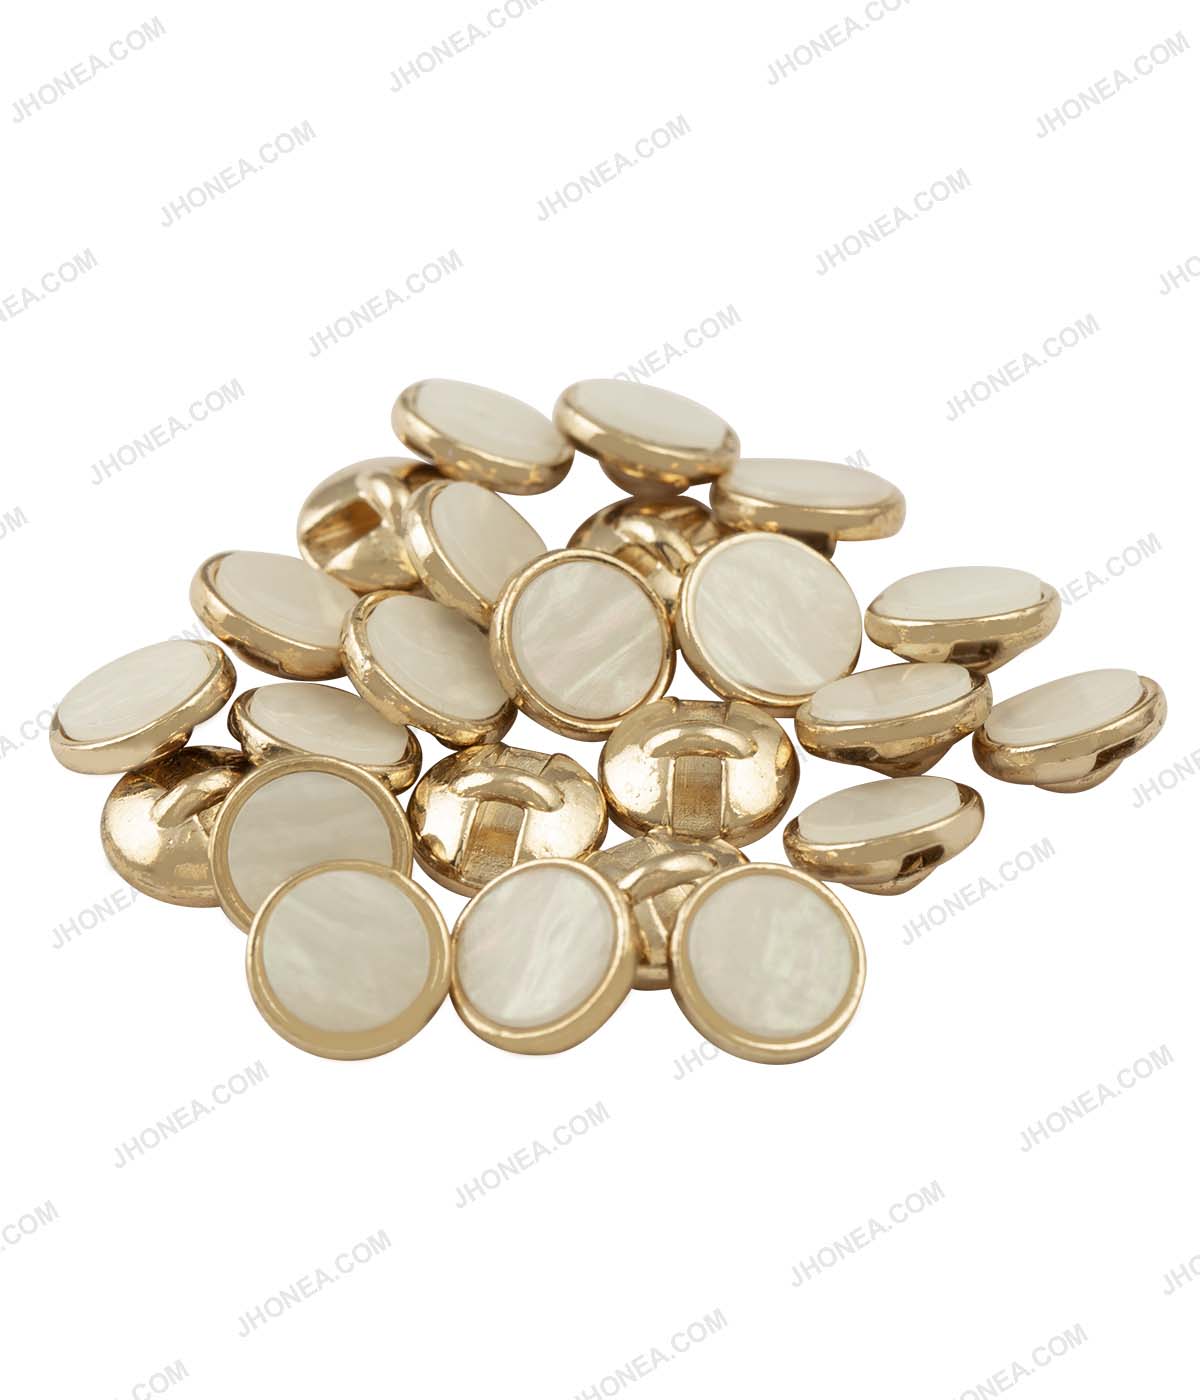 Shiny Gold with White Iridescent Pearl Buttons for Kurtas